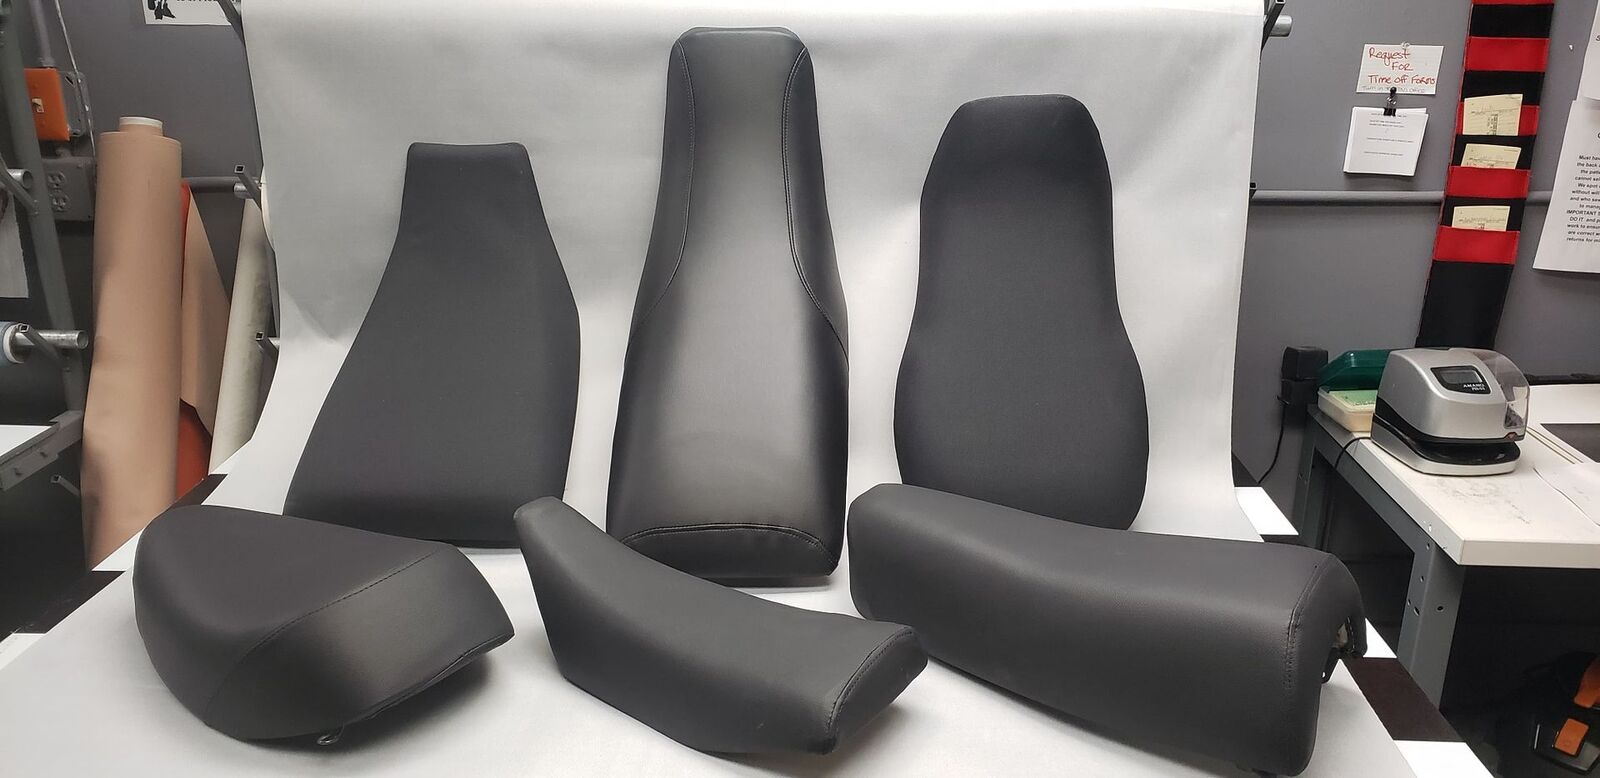 Suzuki TC 120 Seat Cover For 1970 To 1971 Models